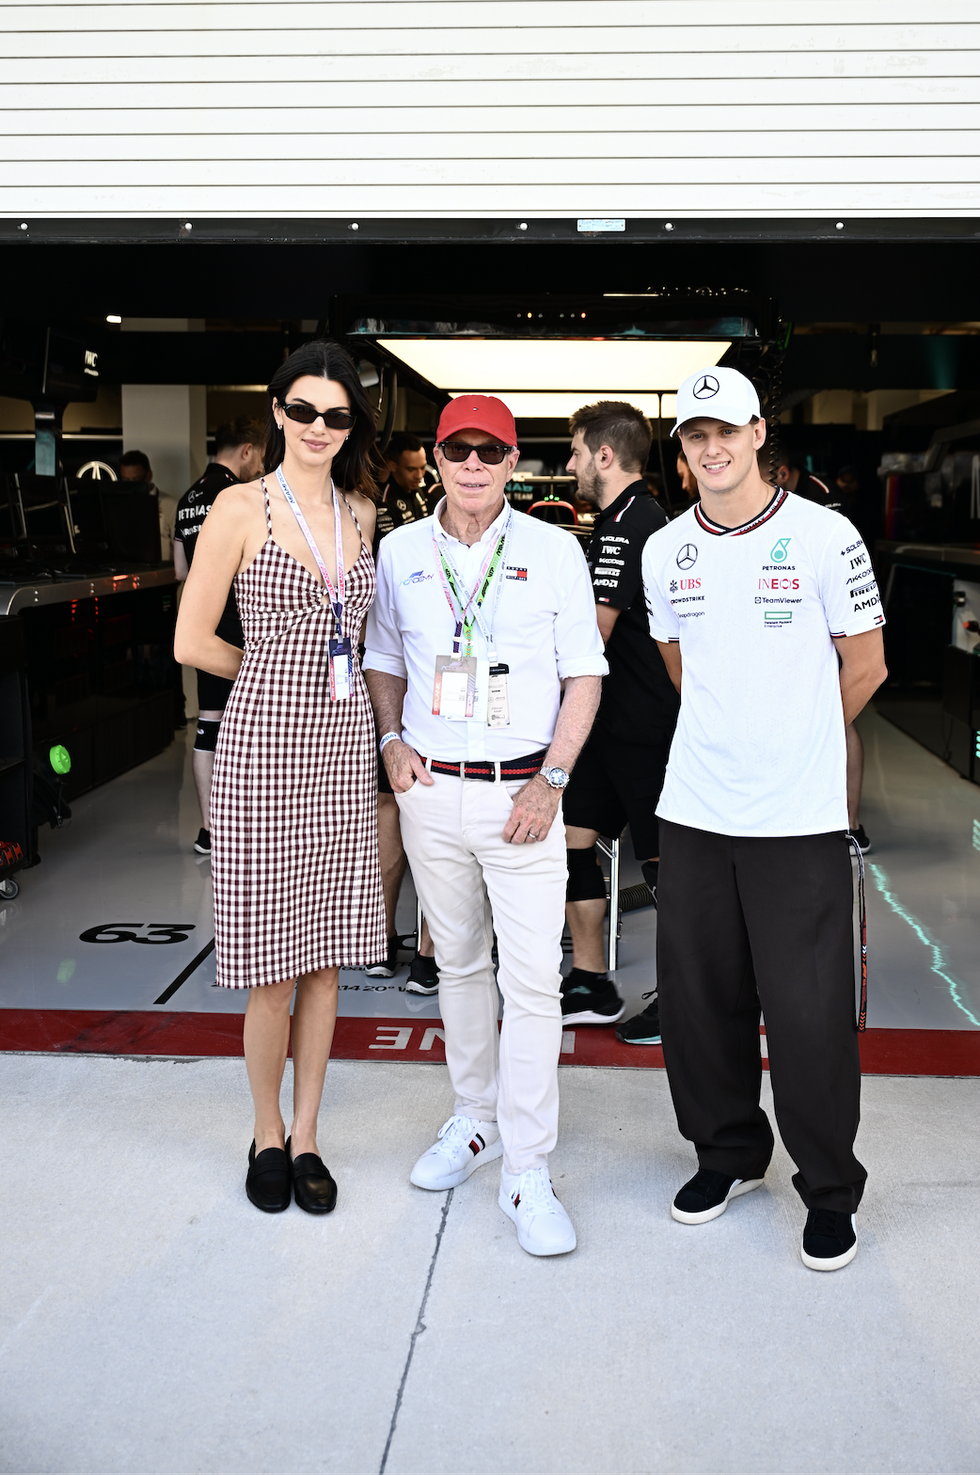 kendall jenner, tommy hilfiger and mick schumacher of germany, reserve driver of mercedes pose for a photo in the pitlane during practice prior to round 2 miami of the f1 academy at miami international autodrome on may 03, 2024 in miami, florida